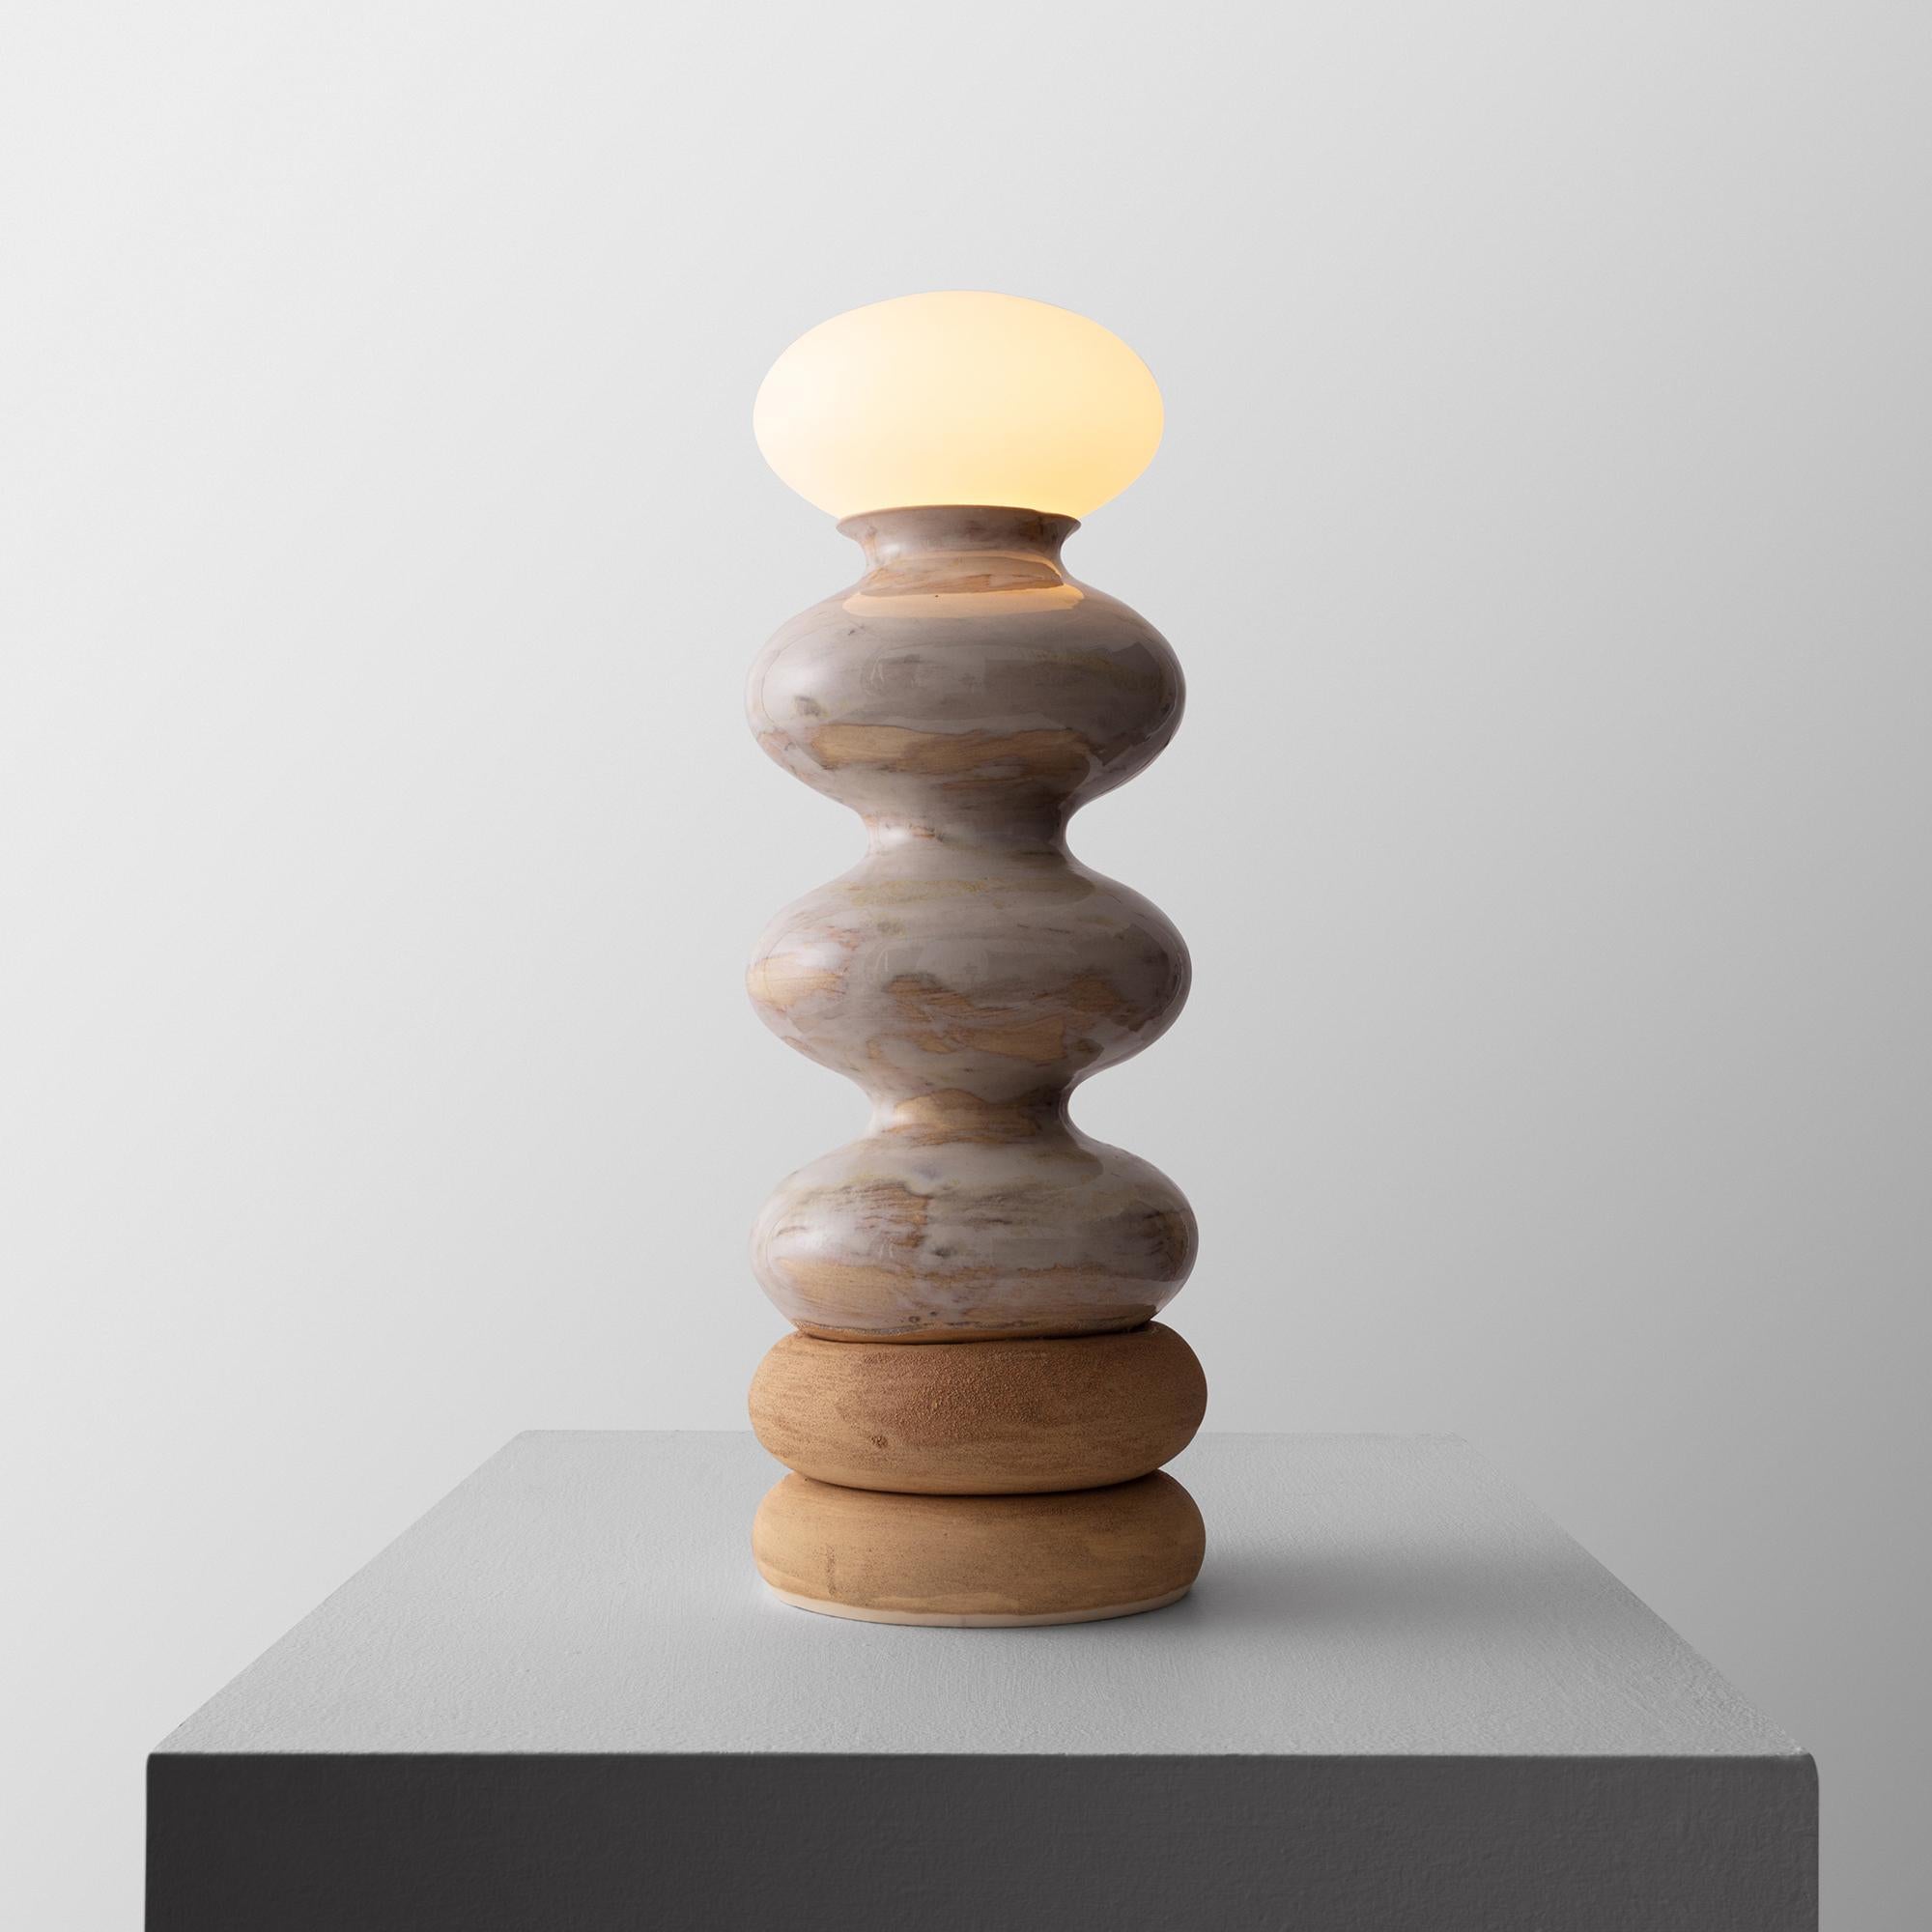 Our wave form lamp 